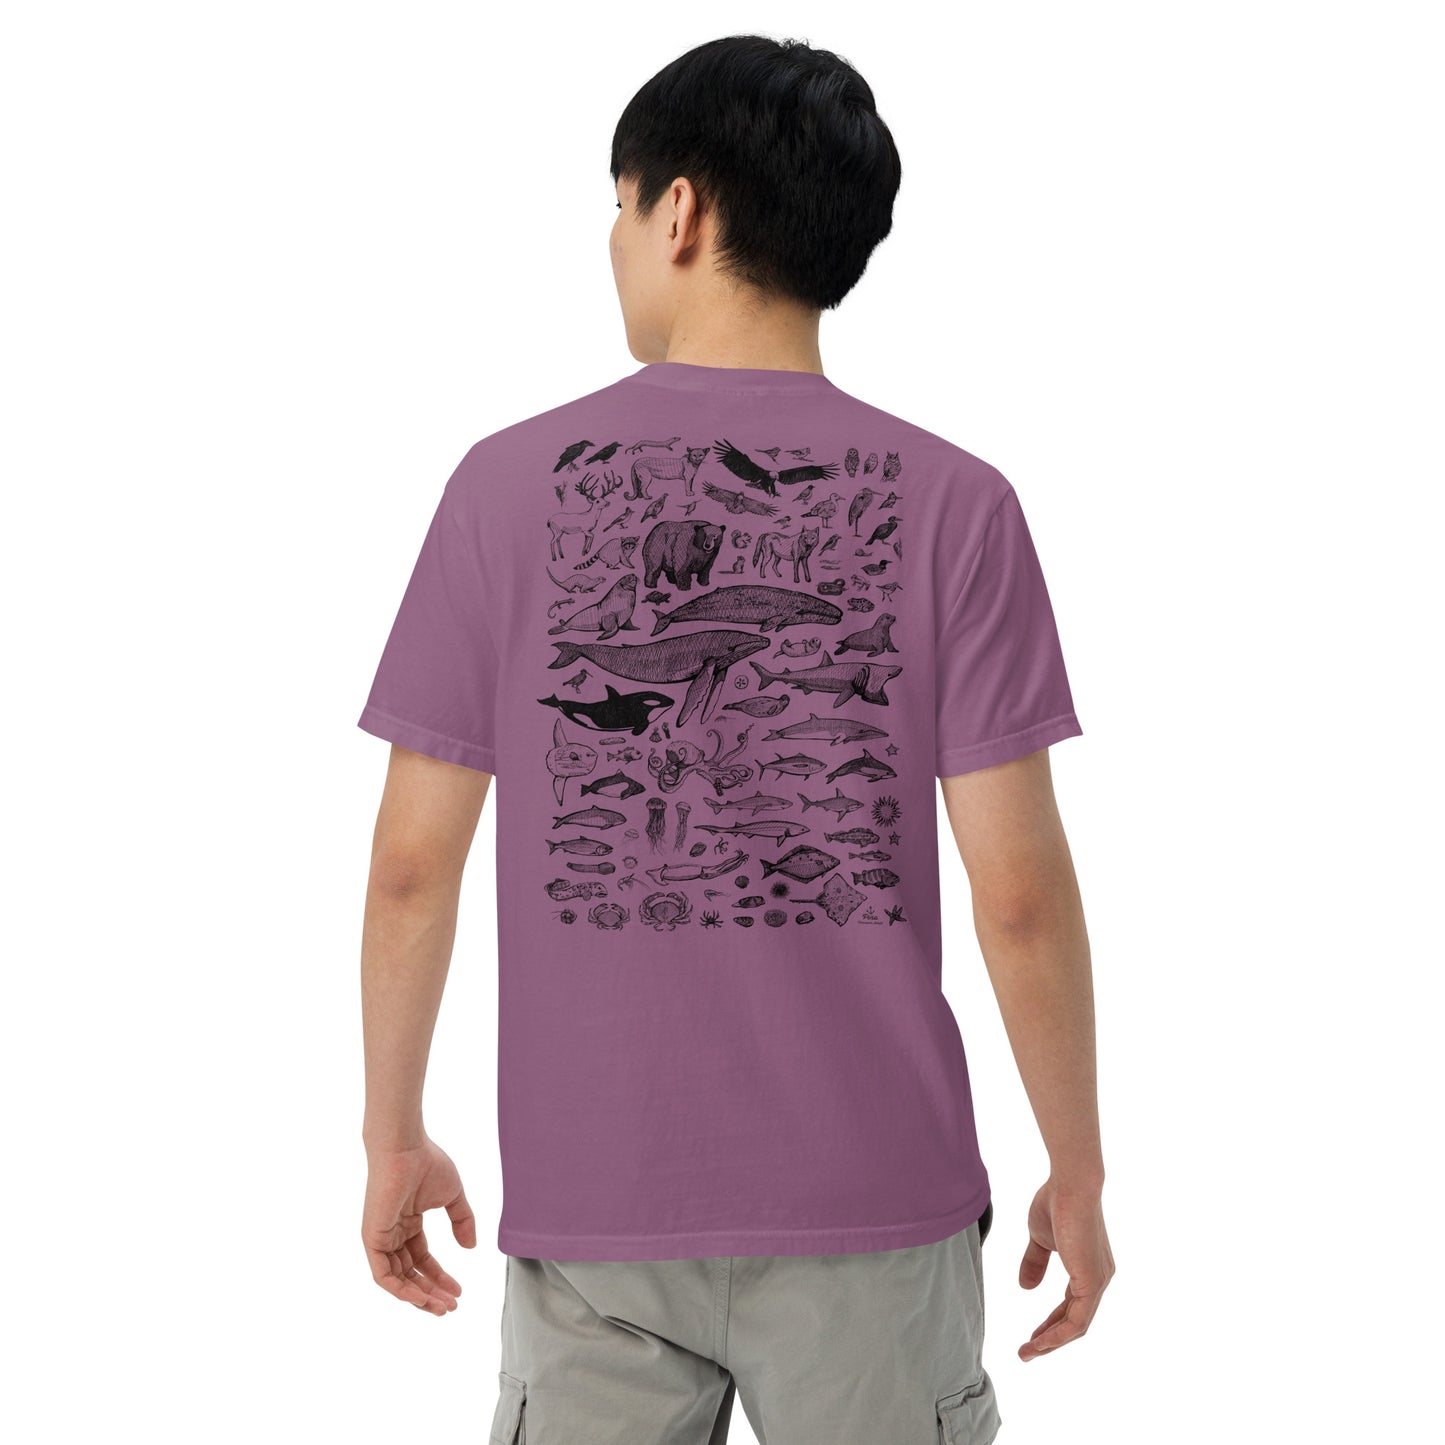 Species of Ucluelet Garment-Dyed Tee